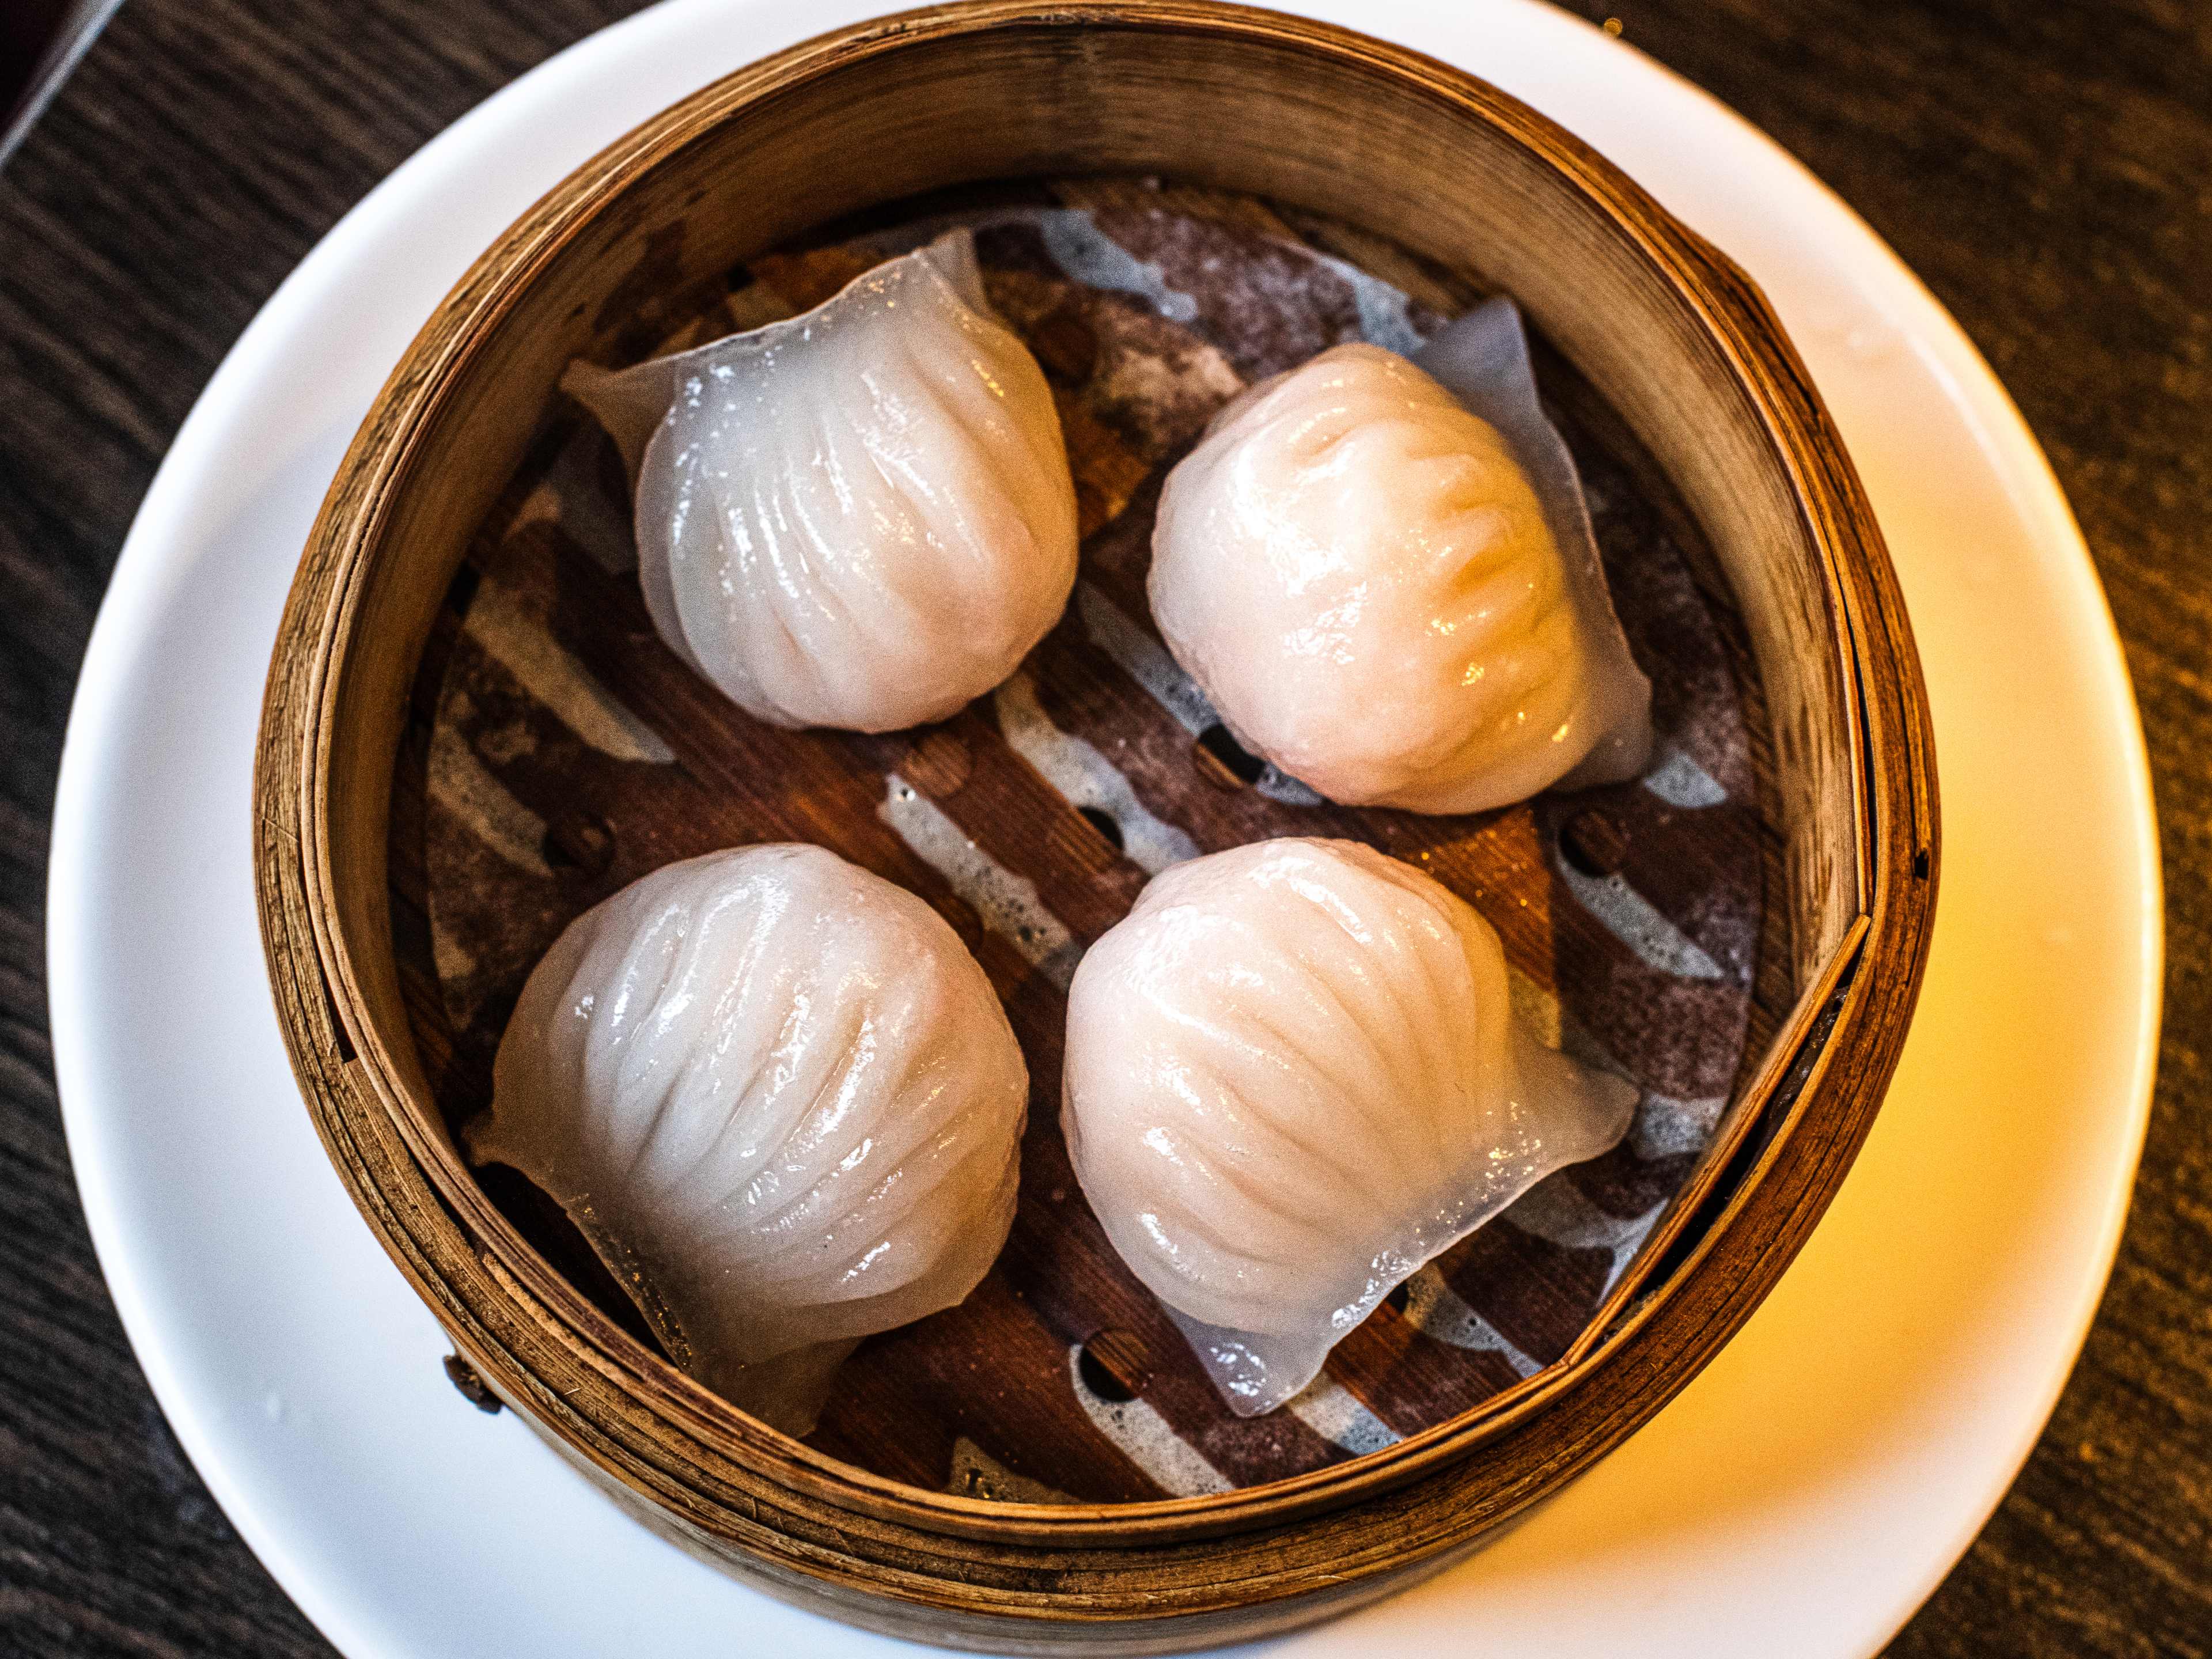 The prawn and scallop dumplings from Sichuan Popo.